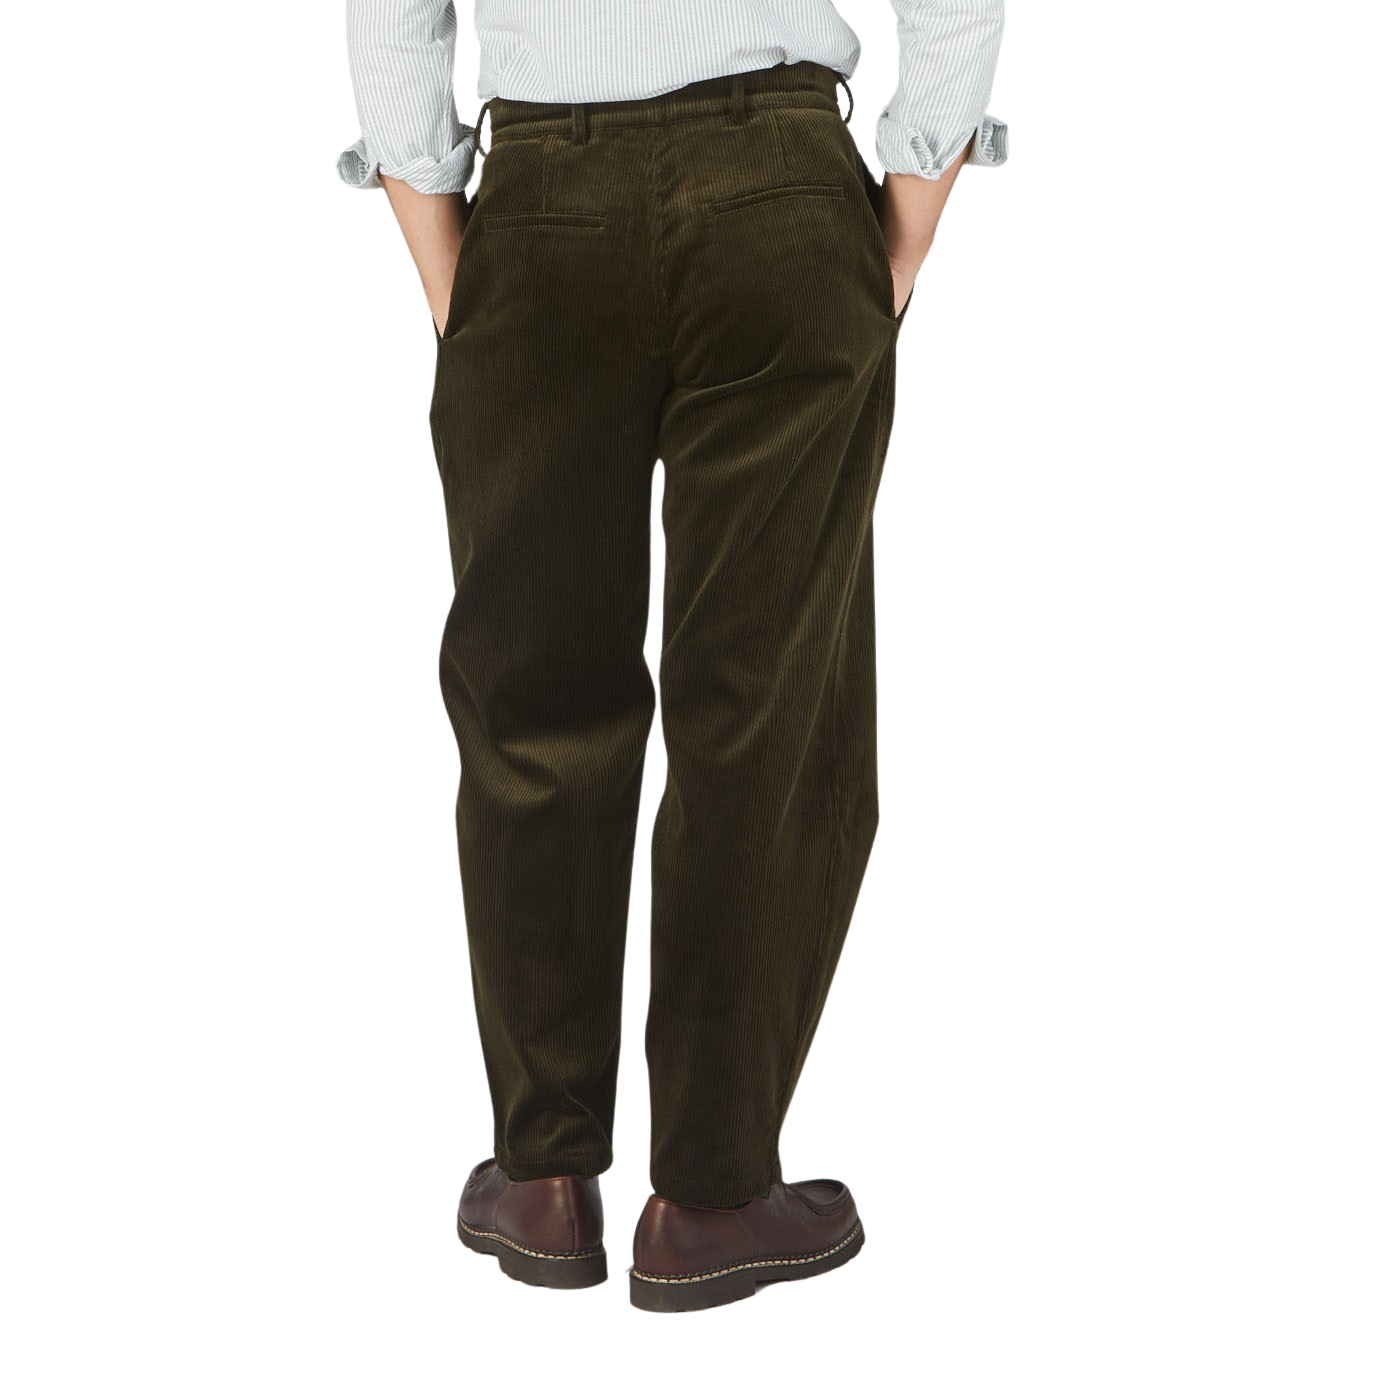 The back view of a man wearing Dark Olive Cotton Corduroy Balloon Trousers made by De Bonne Facture.